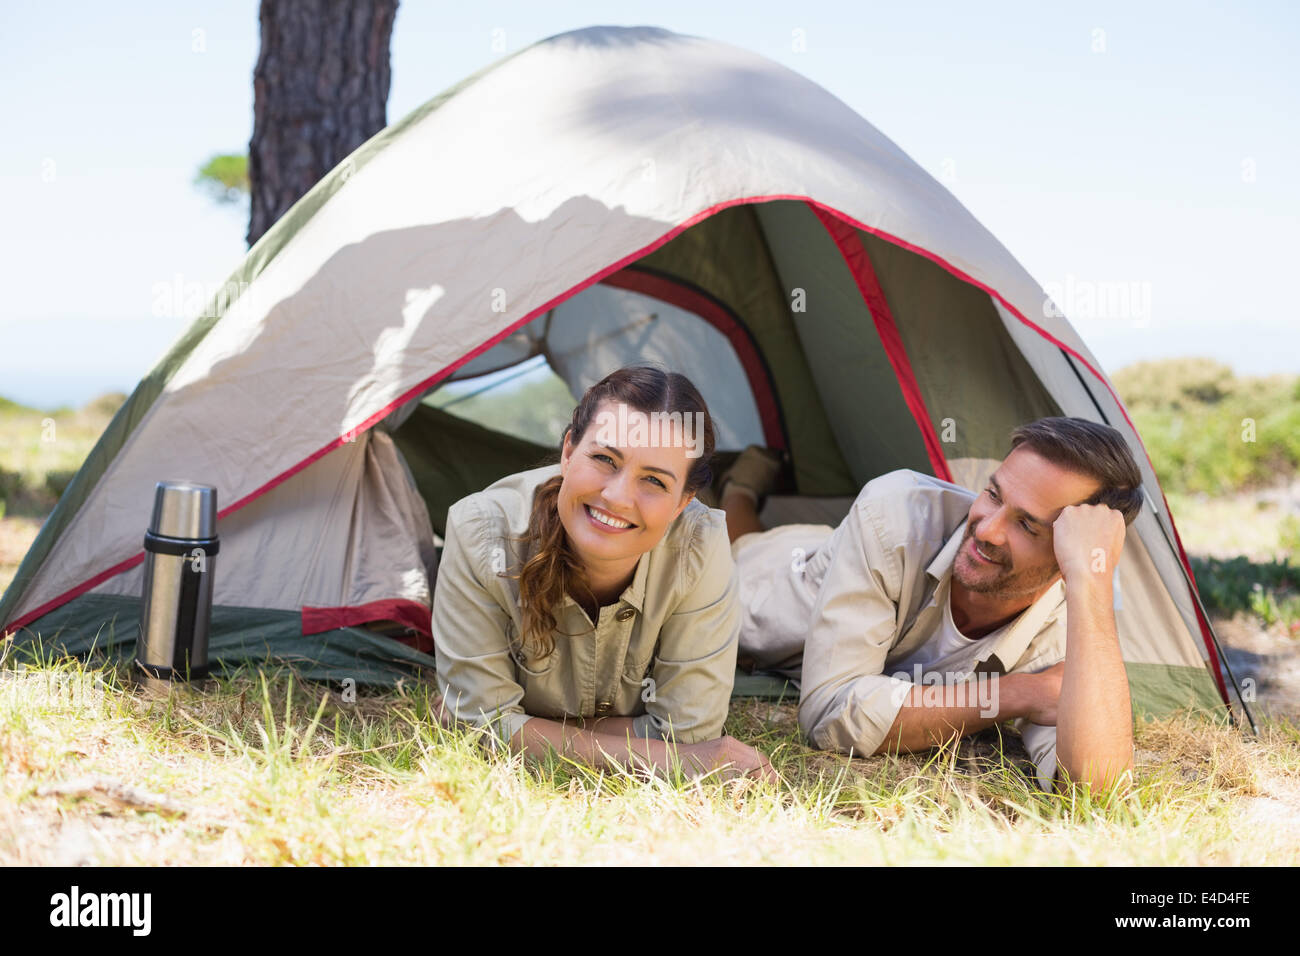 Outdoorsy couple smiling at camera inside their tent Stock Photo